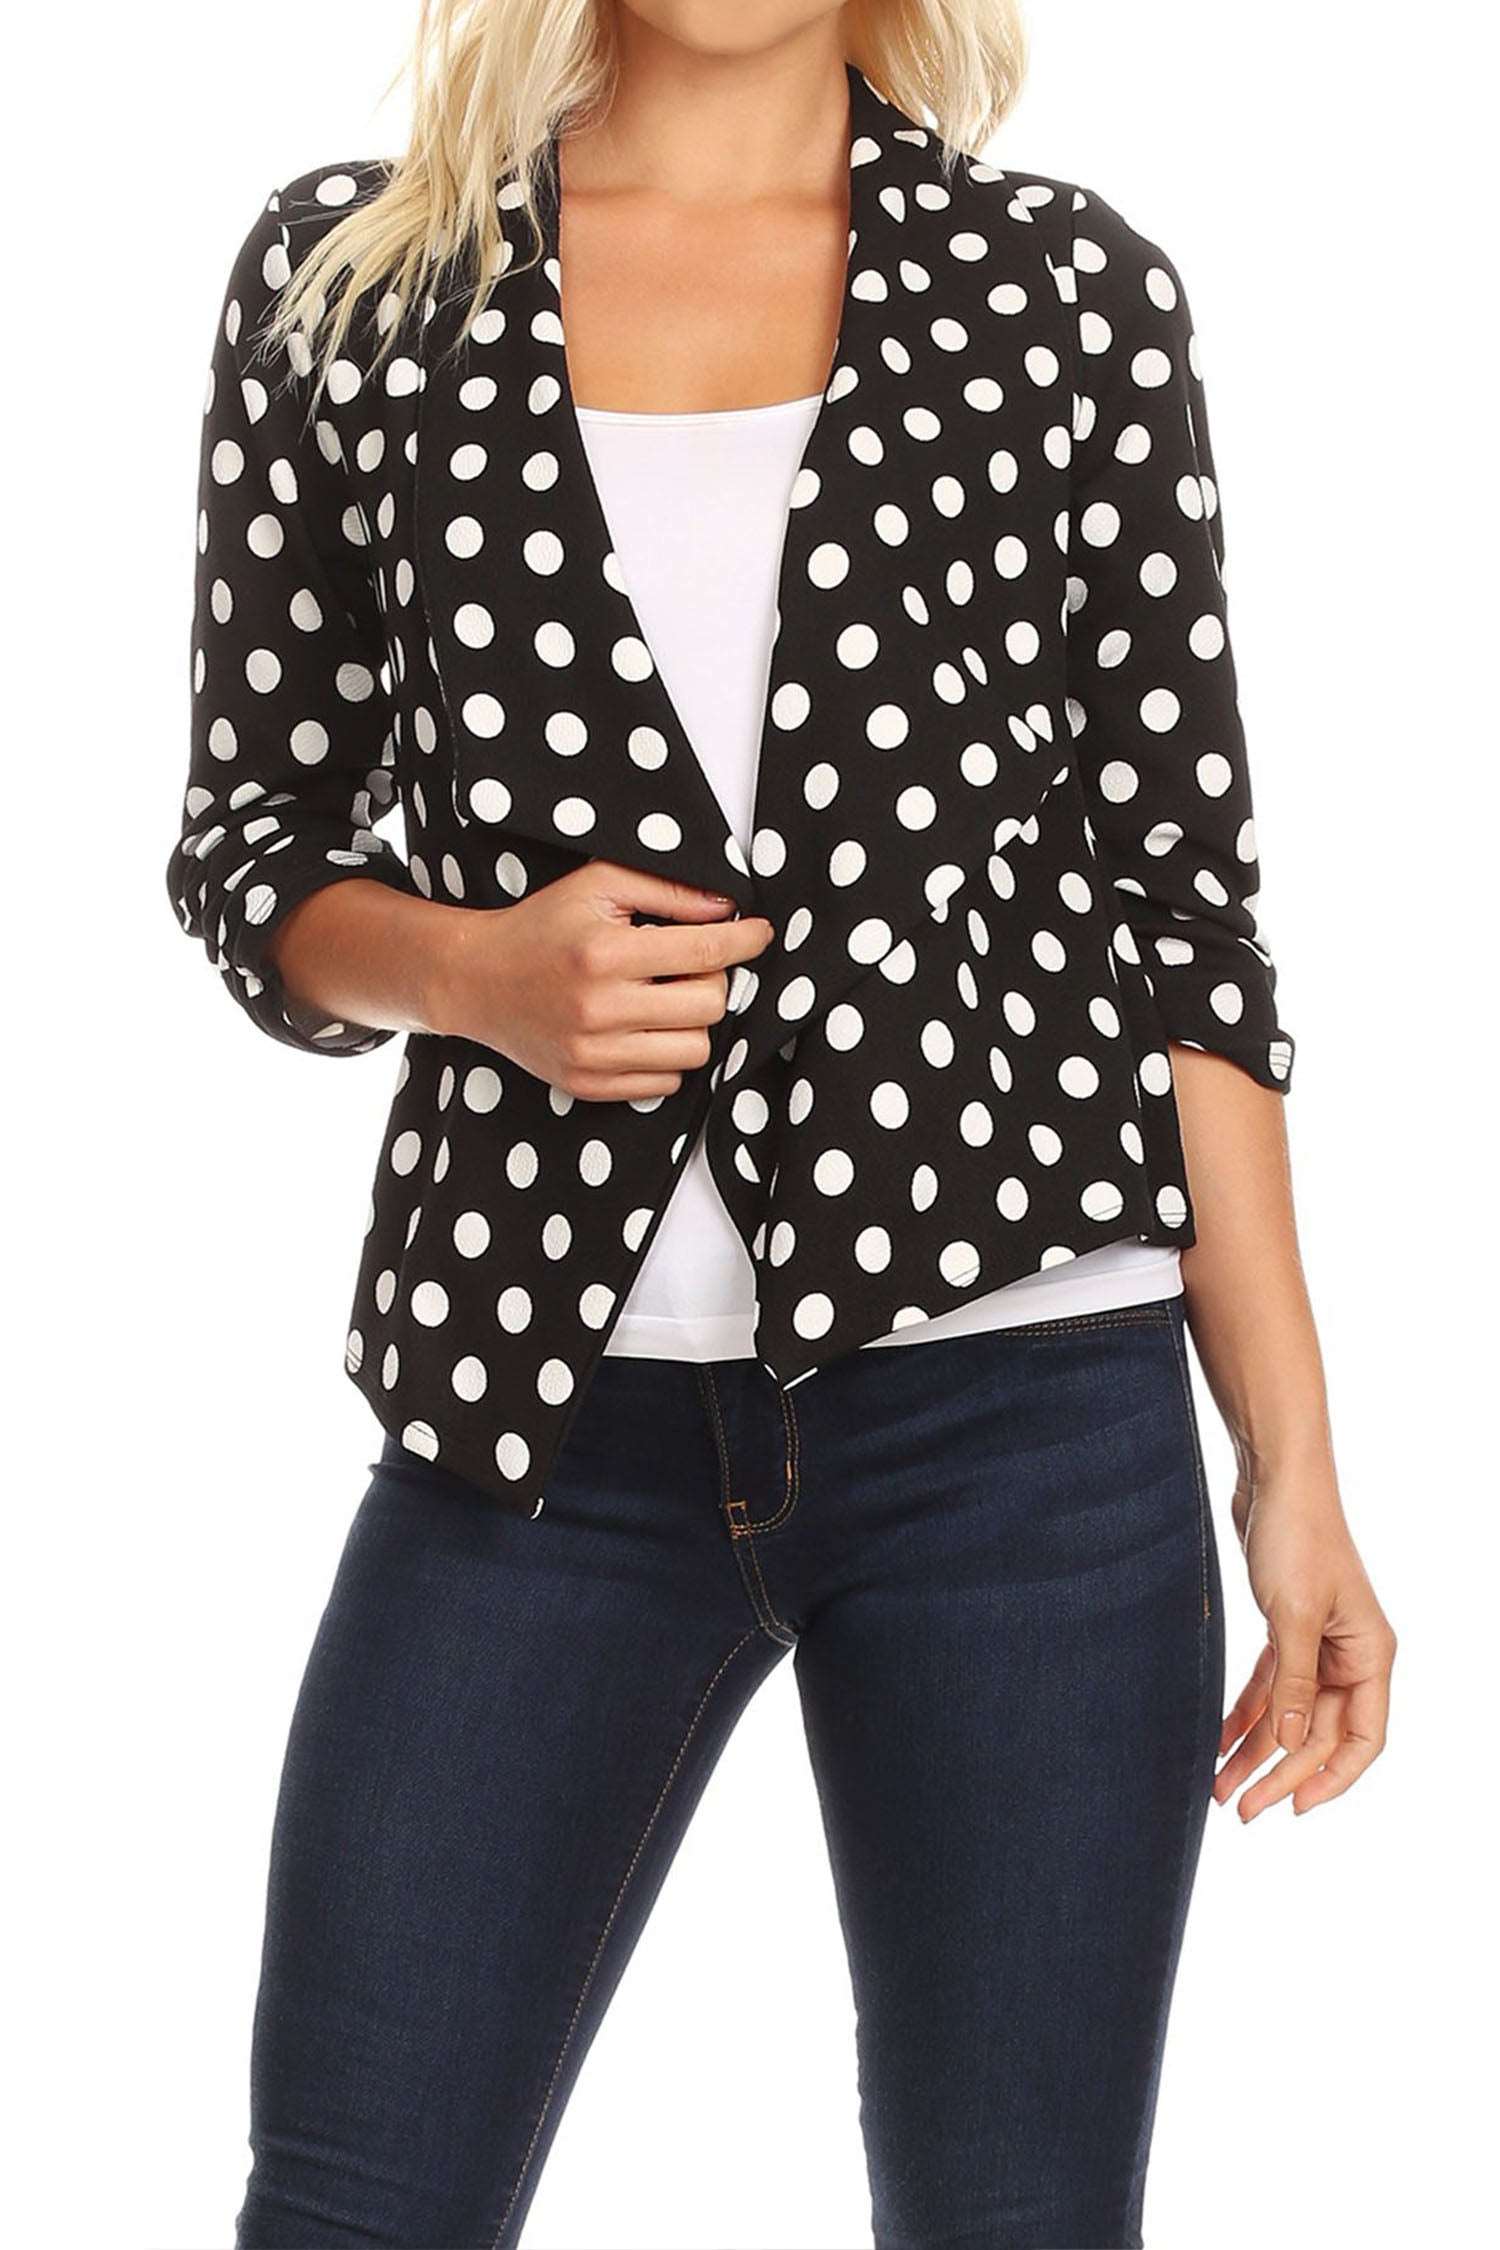 Women's Casual Open Front Polka Dot Roll Up Sleeve Blazer Jacket Made in USA